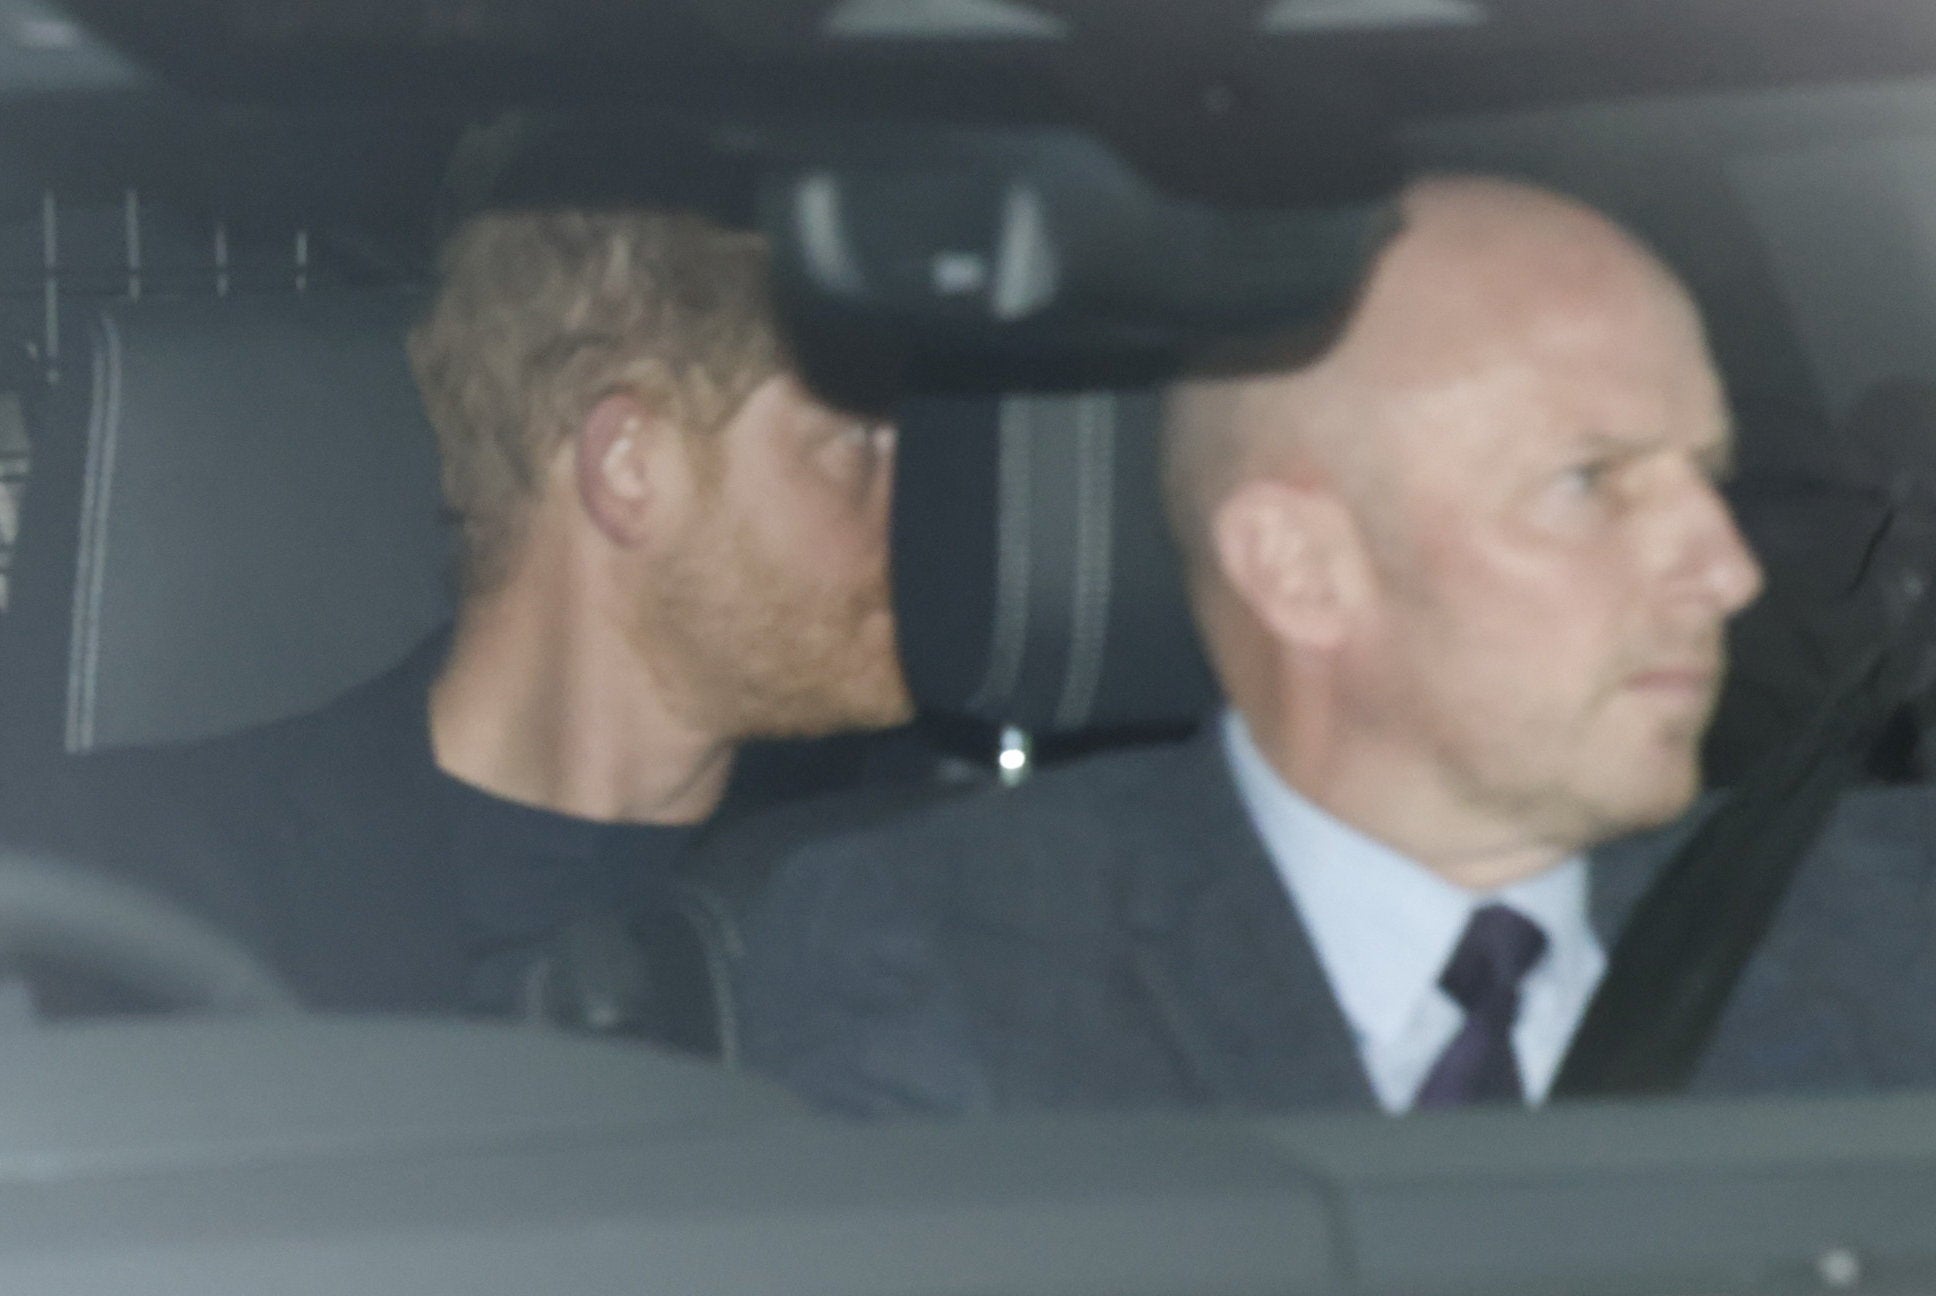 Prince Harry arrives at Clarence House after flying from California to visit his father